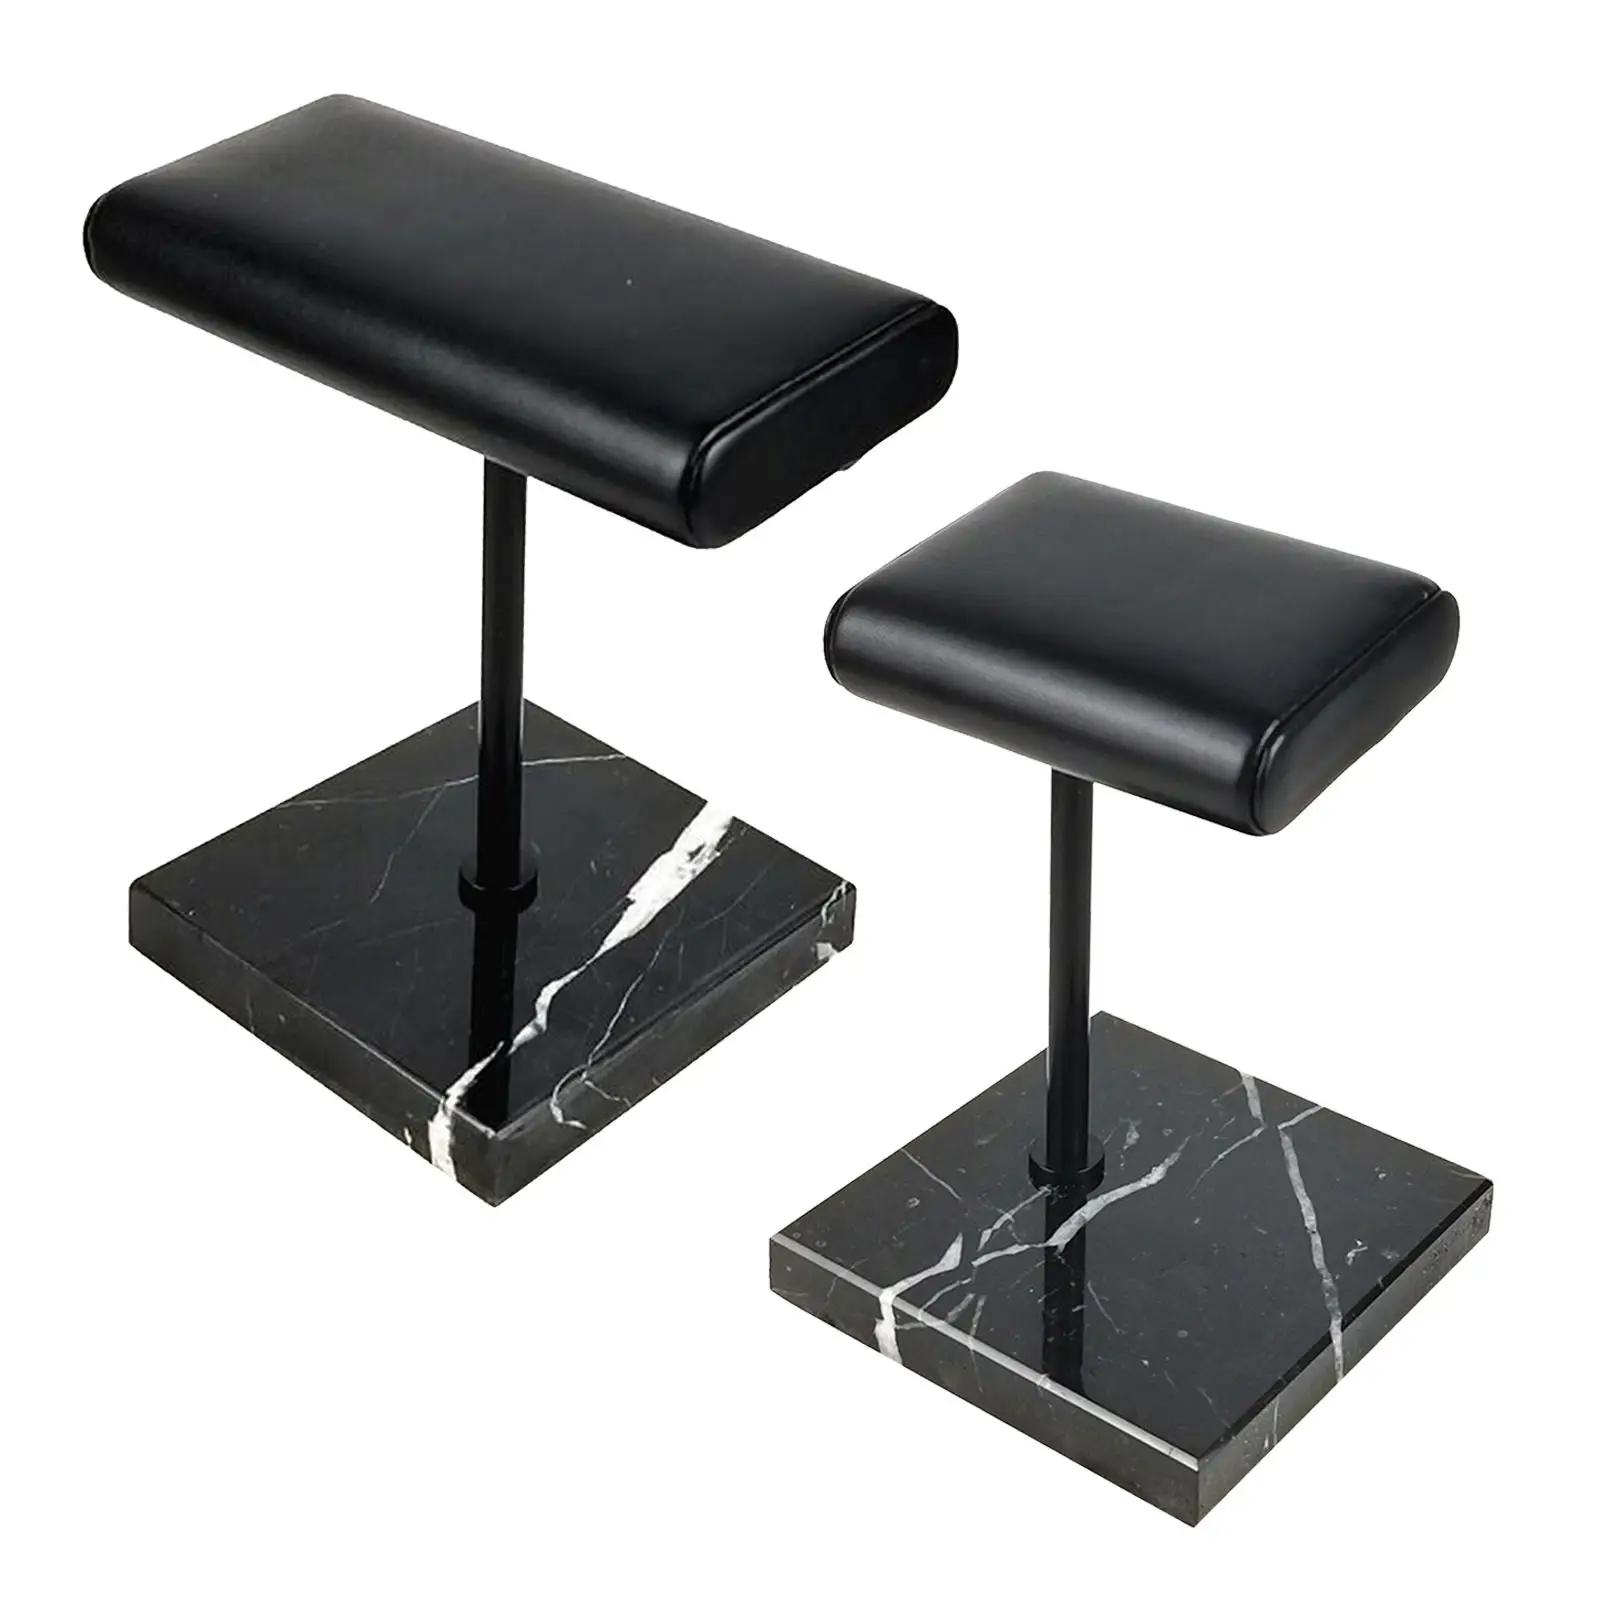 

Leather & Marble Watch Display Stand Holder for Personal Use or Retail Shop Countertop, for Jewelry Bracelets and Bangles